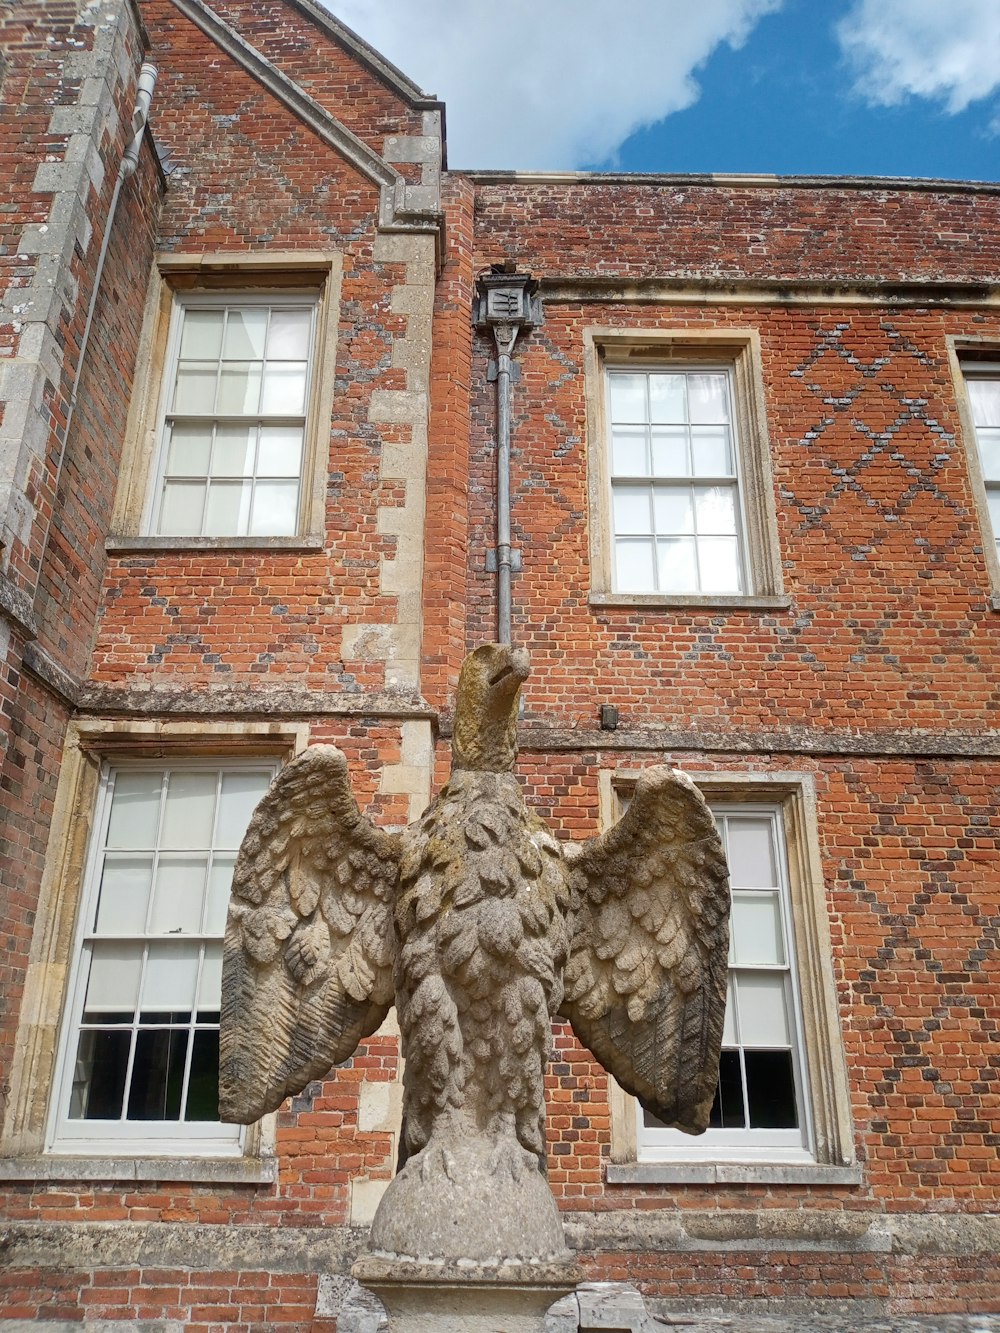 a statue of an eagle on a pedestal in front of a brick building